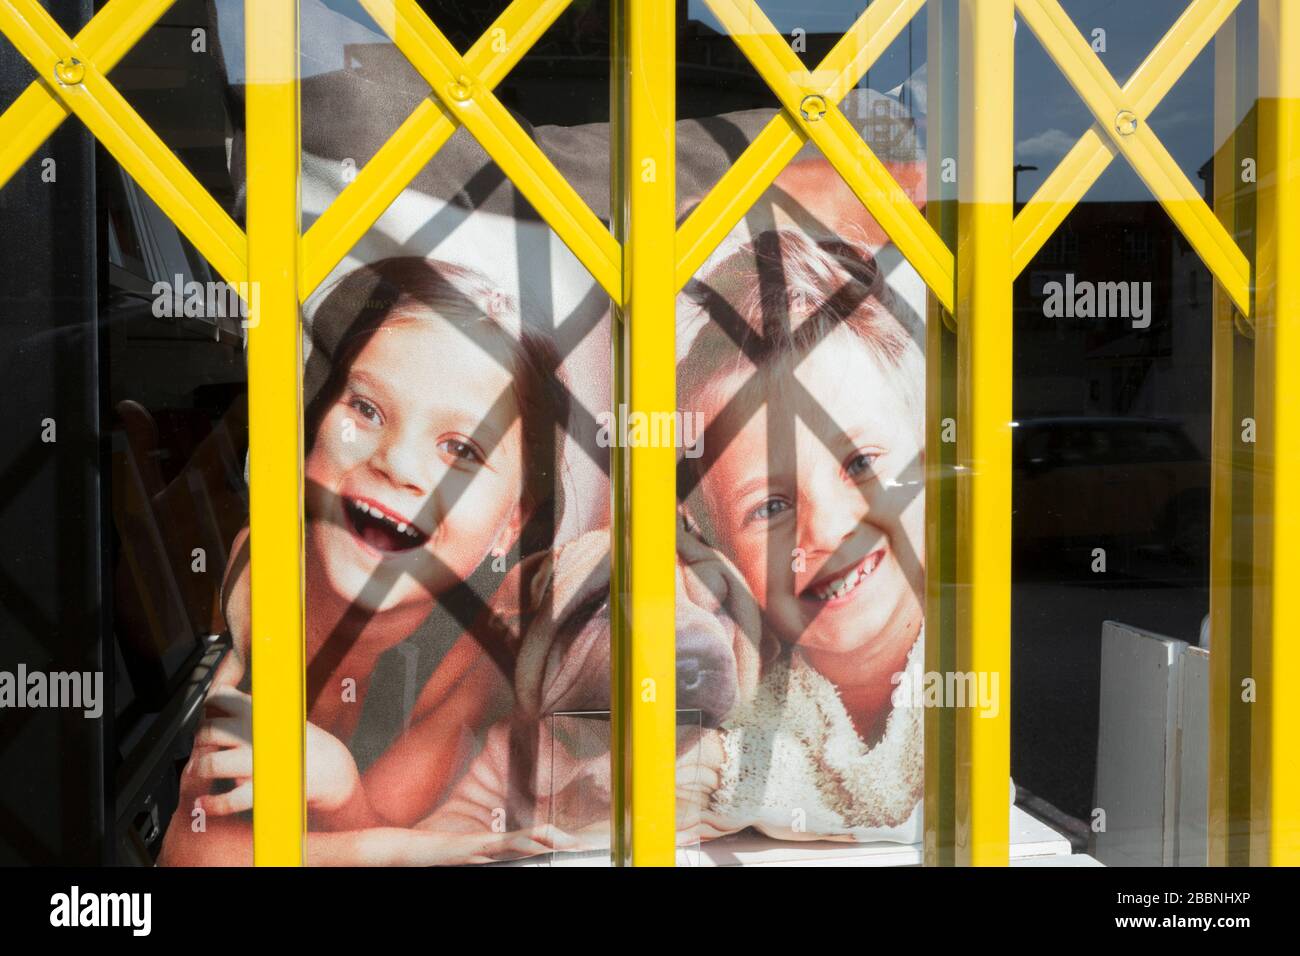 As the second week of the Coronavirus lockdown continues around the capital, and the UK death toll rising by 563 to 2,325, with 800,000 reported cases of Covid-19 worldwide, two young girls smile with their pet dog on a printed cushion in the window of a Snappy Snaps shop in Clapham - a metaphor for family isolation and social distancing during the pandemic, on 1st April 2020, in London, England. Stock Photo